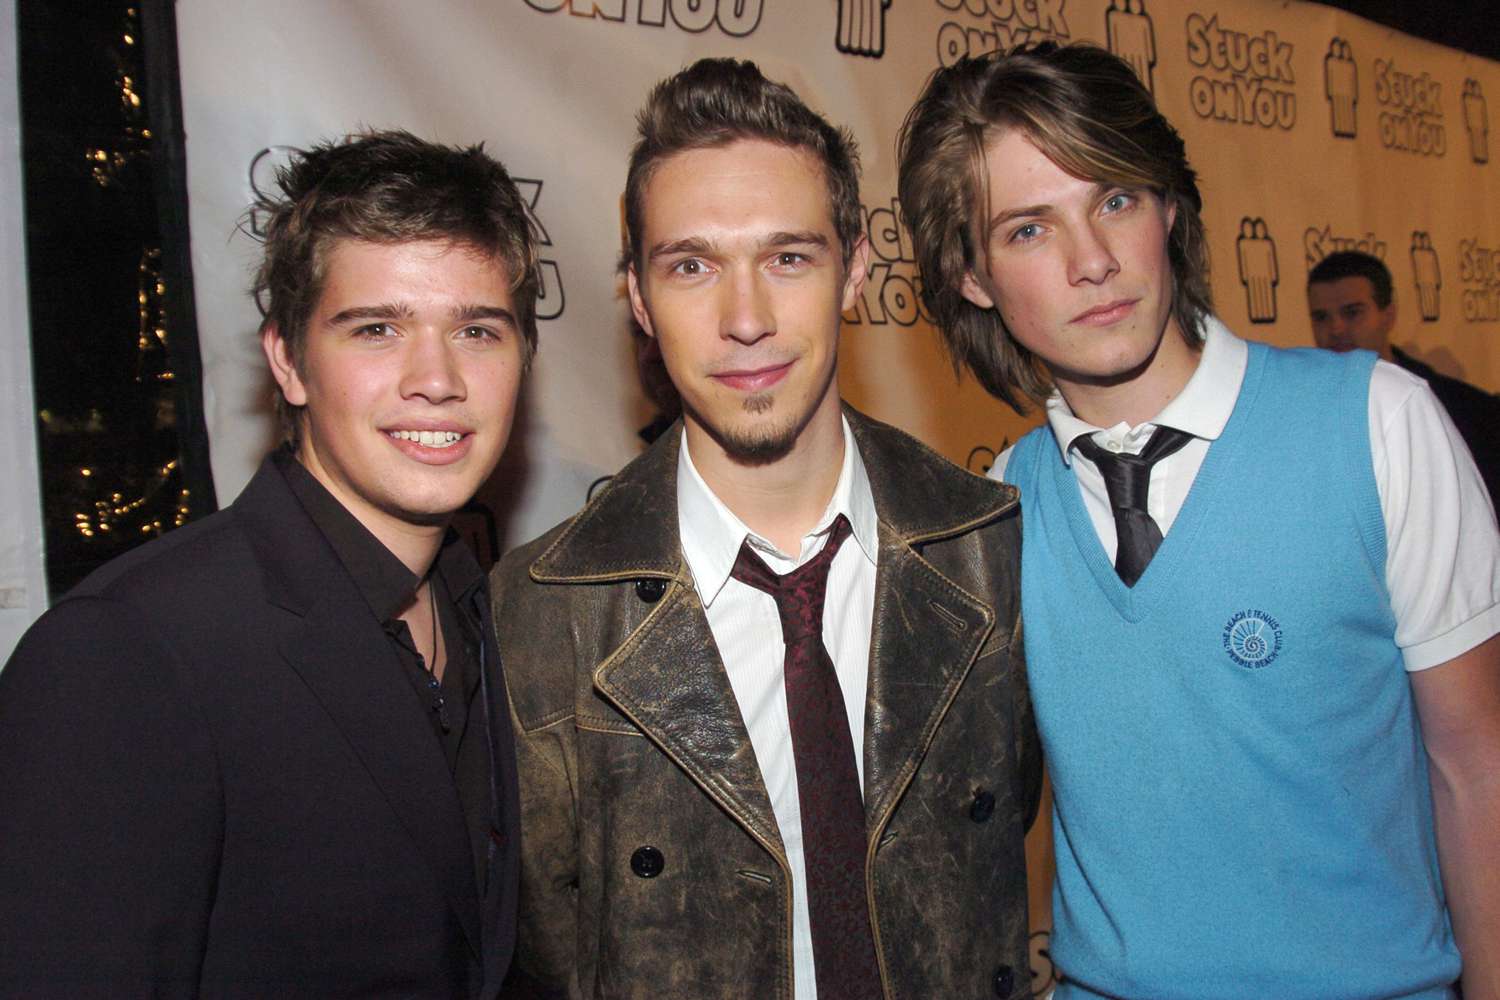 Zac Hanson, Isaac Hanson and Taylor Hanson during "Stuck On You" - New York Premiere - Inside Arrivals at Clearview Chelsea Cinema in New York City, New York, United States